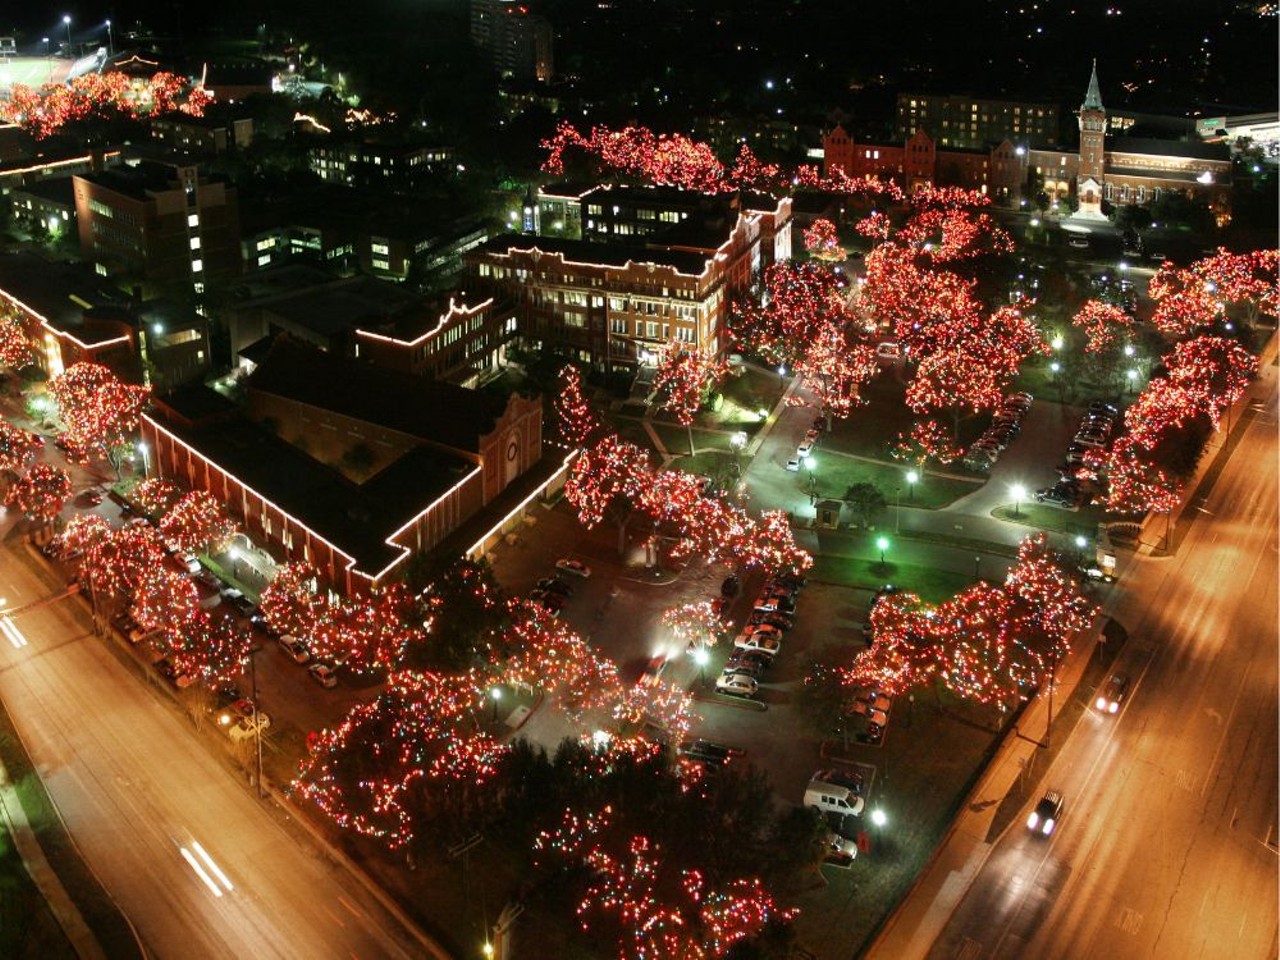 University of the Incarnate Word
4301 Broadway, uiw.edu/lighttheway
After the opening ceremony and festivities of Light The Way on Nov. 18, the beautiful display of lights across the UIW campus remain throughout the holiday season. You’ll find lights nestled on numerous trees that illuminate this historic campus.